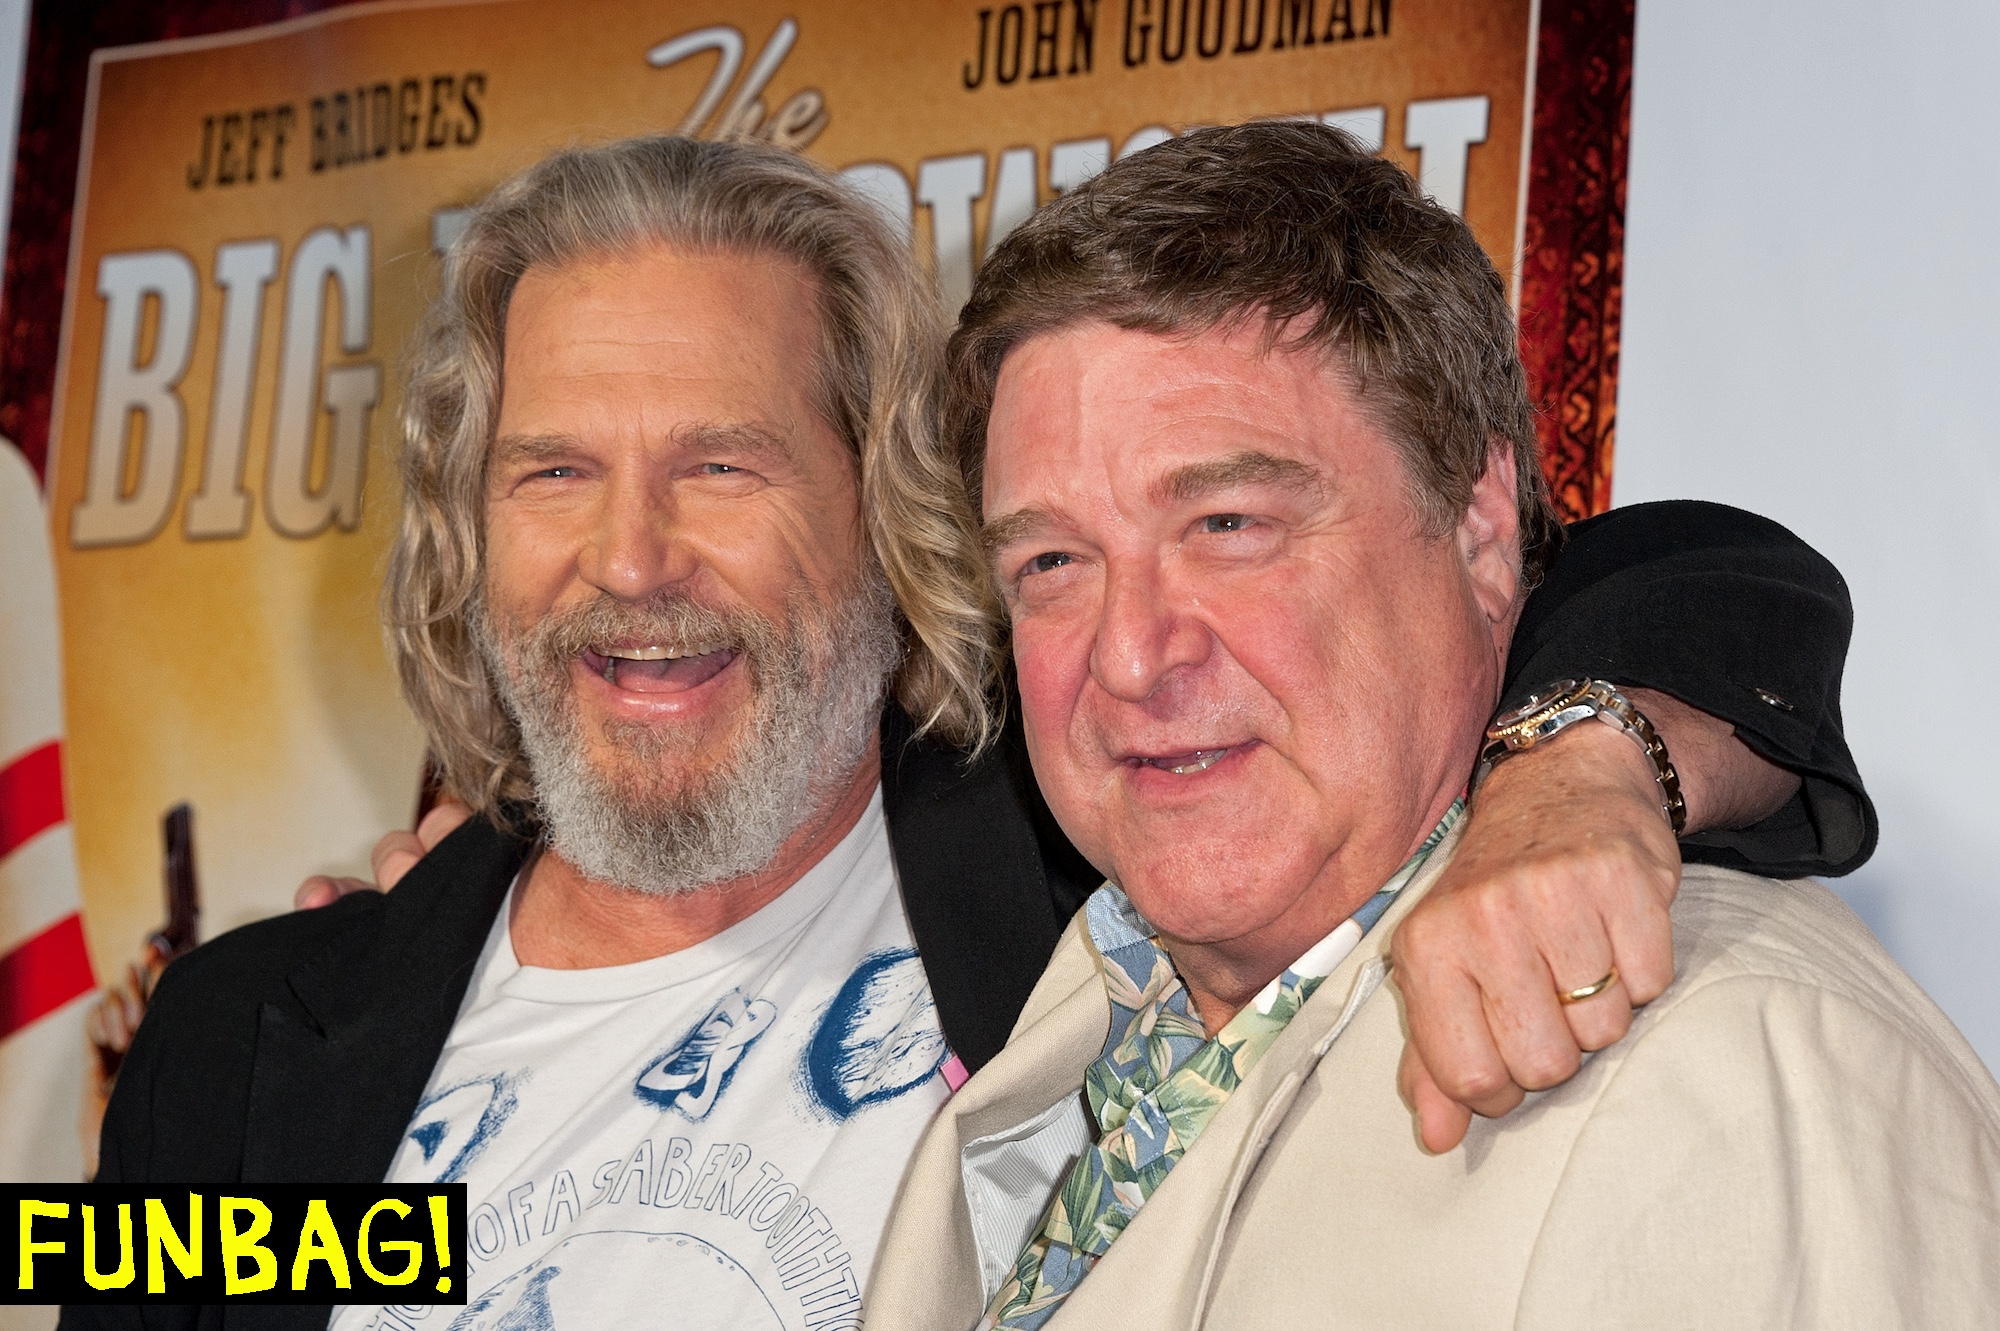 NEW YORK, NY - AUGUST 16: Actors Jeff Bridges (L) and John Goodman attend "The Big Lebowski" Blu-ray release at the Hammerstein Ballroom on August 16, 2011 in New York City. (Photo by D Dipasupil/FilmMagic)